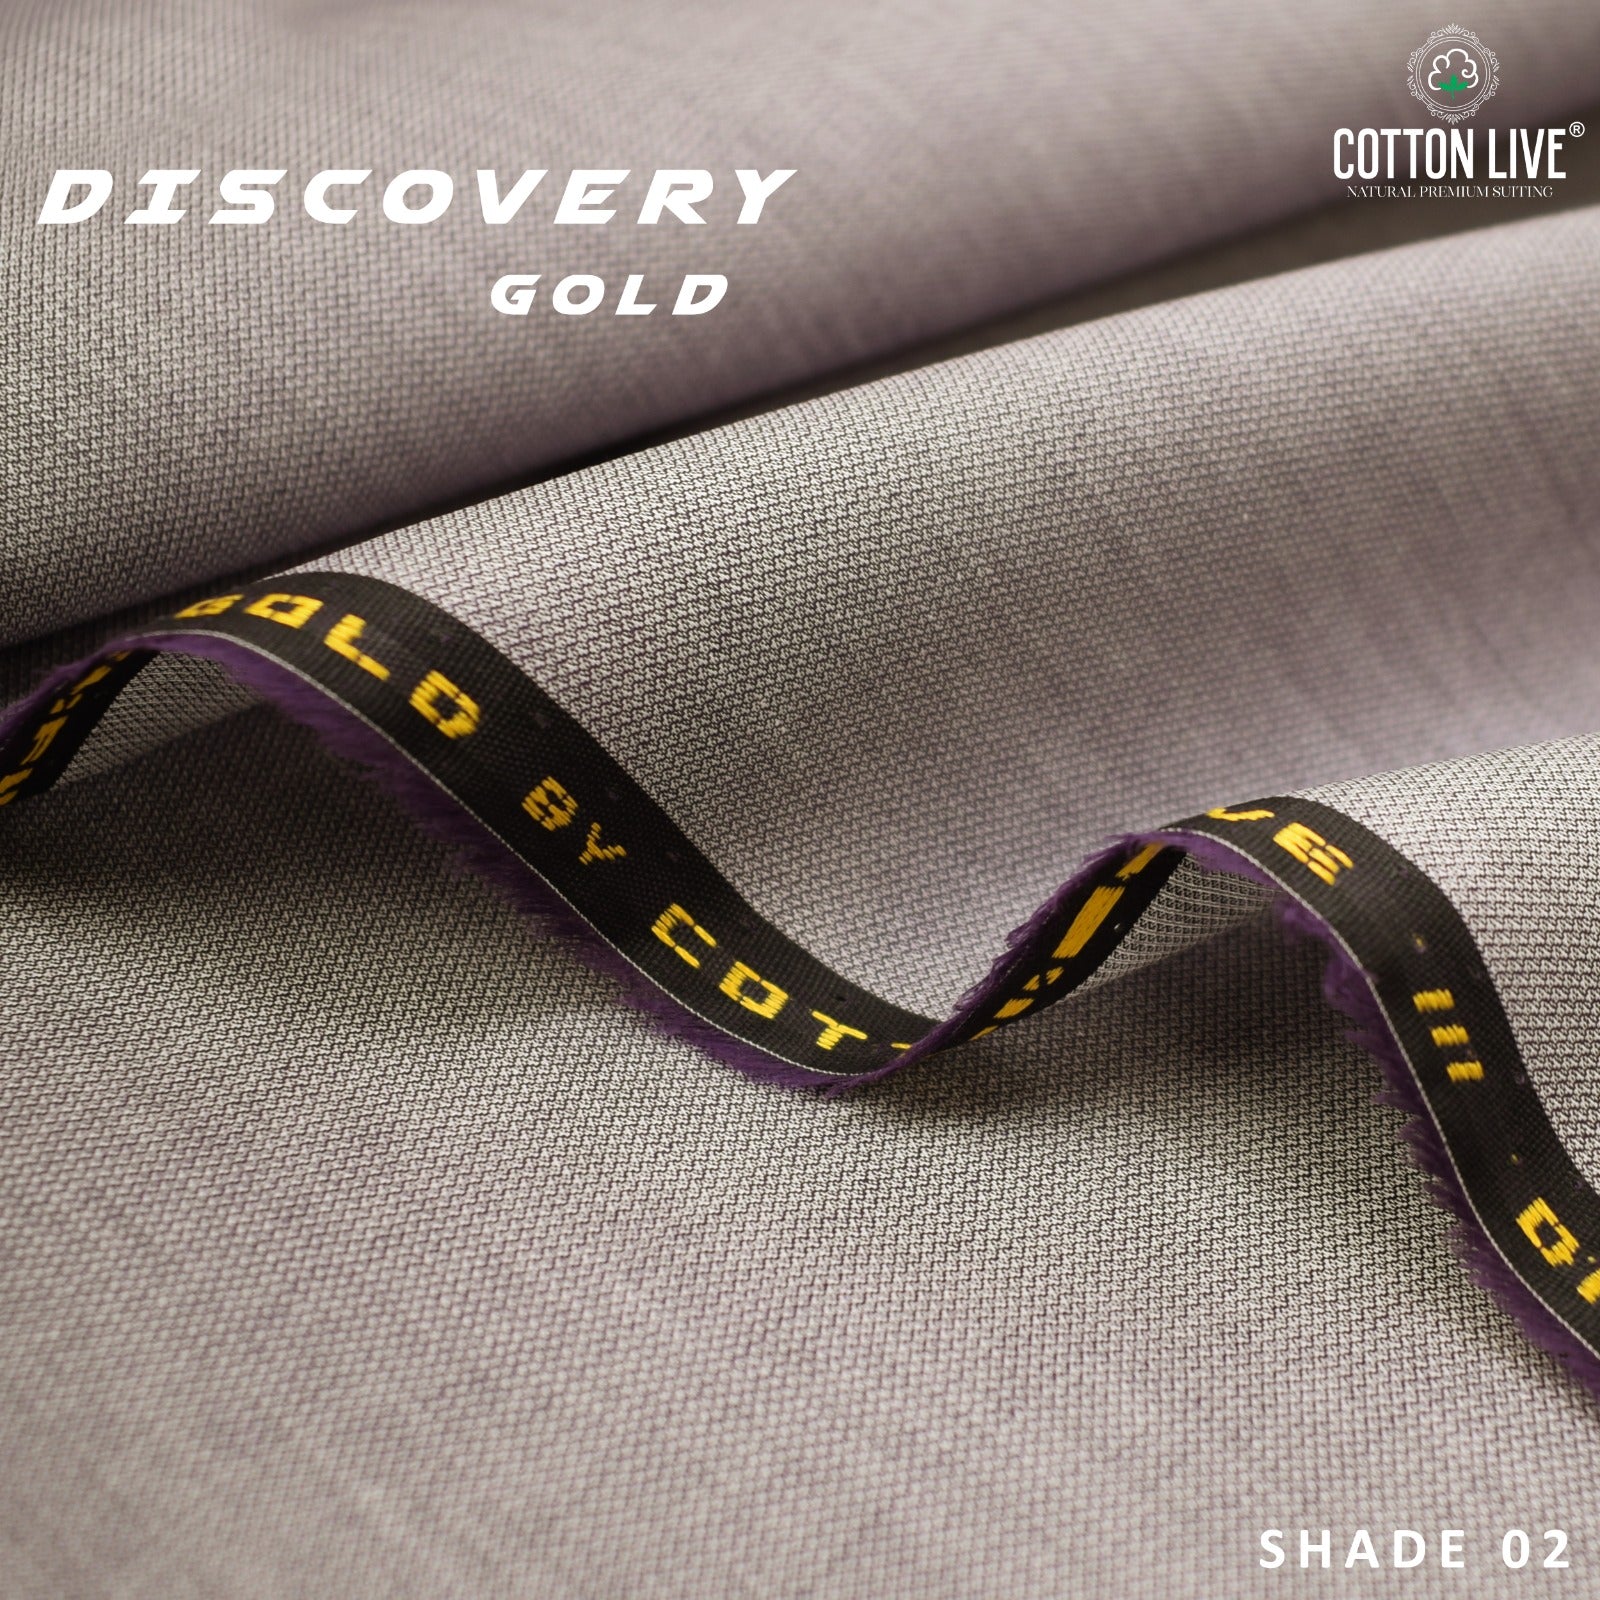 Discovery Gold Cotton Multiple Colour